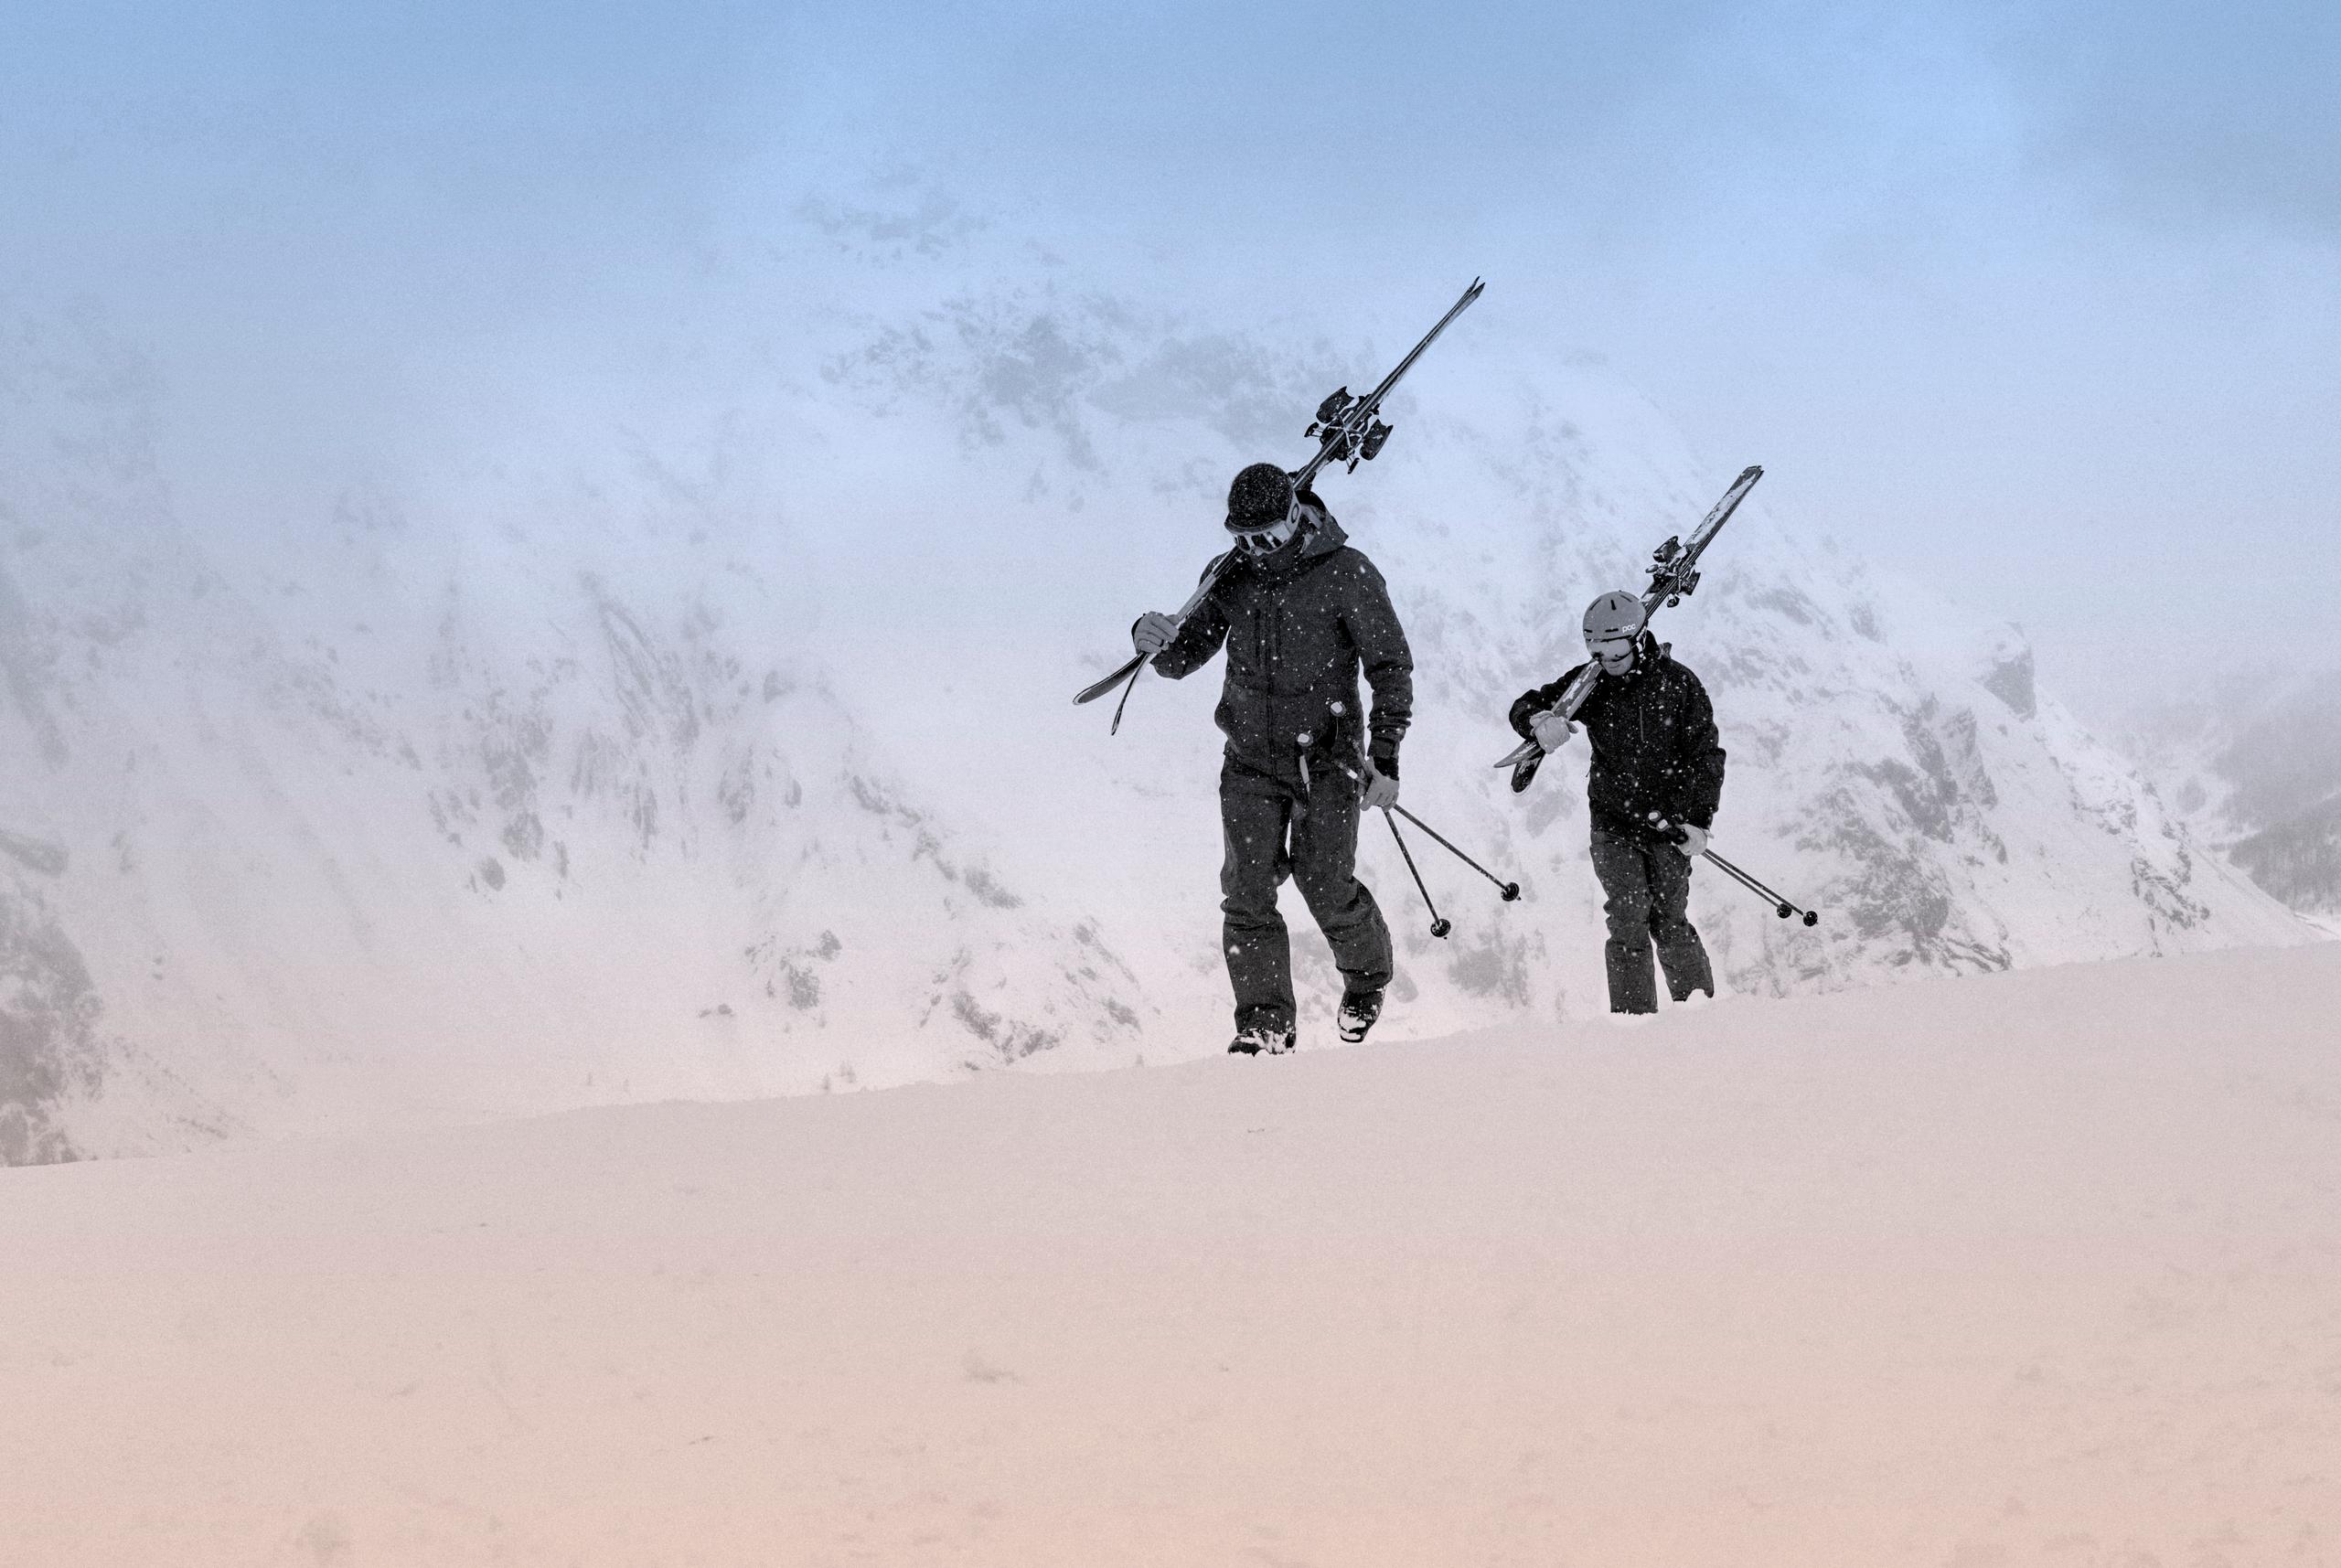 Black and white photo of two skiers walking across a snowy mountain